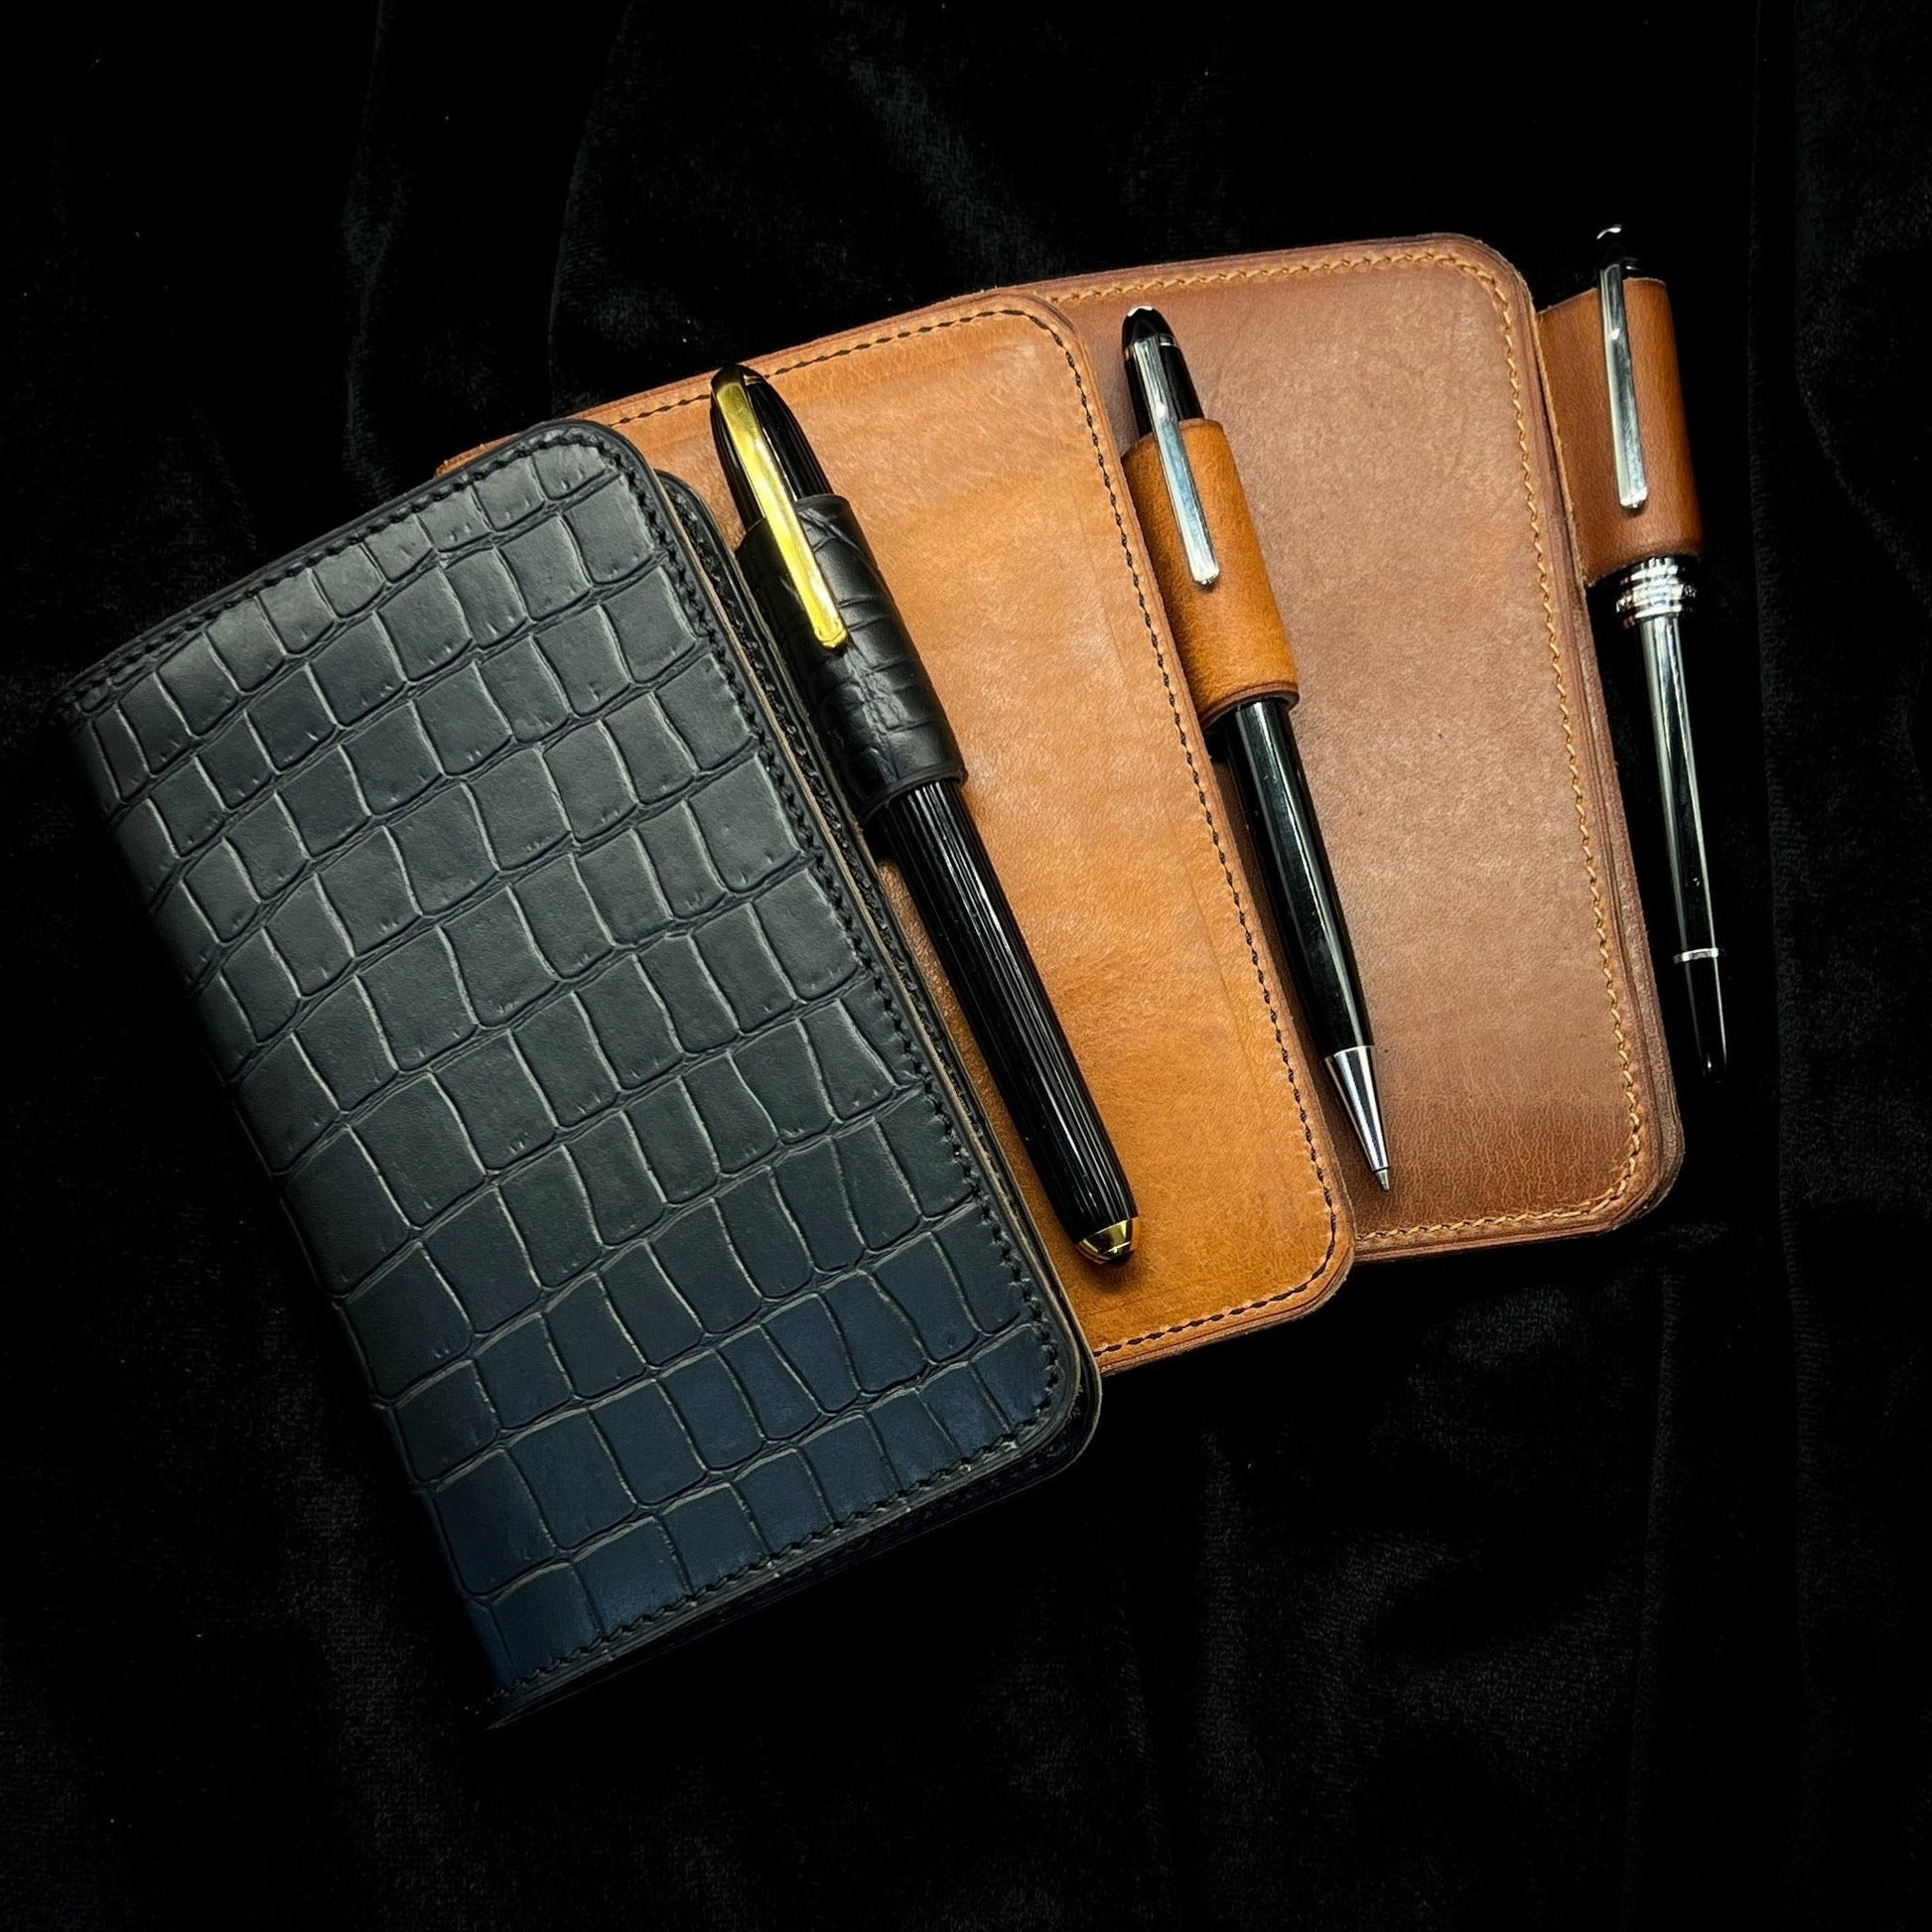 Personalized Handmade Field Notes Journal Covers in Horween Leather | Handmade in Houston | Custom Leather and Pen